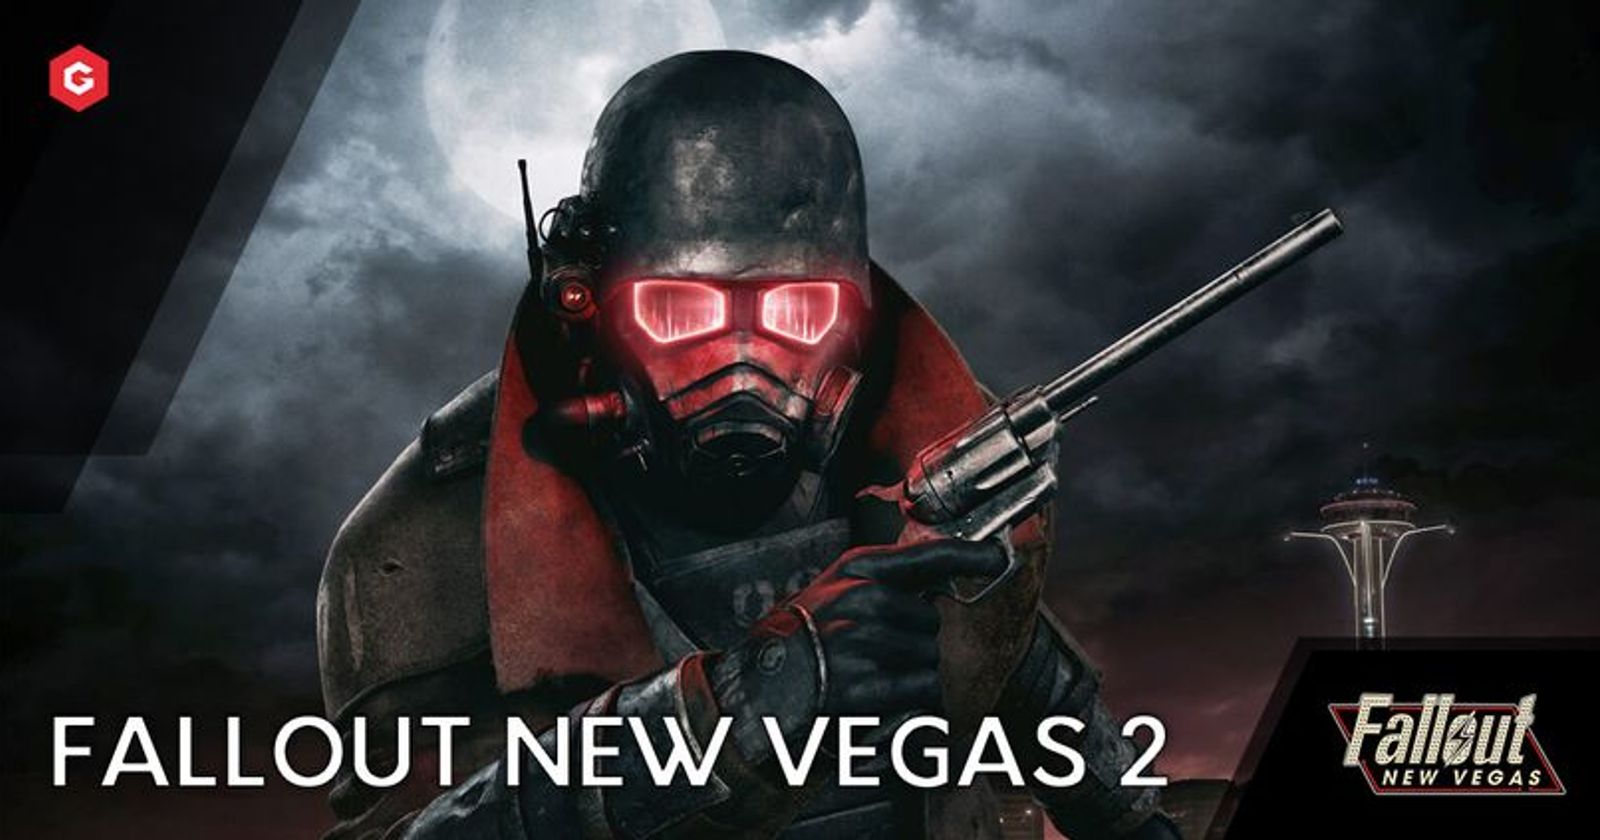 Microsoft is looking at Fallout New Vegas 2